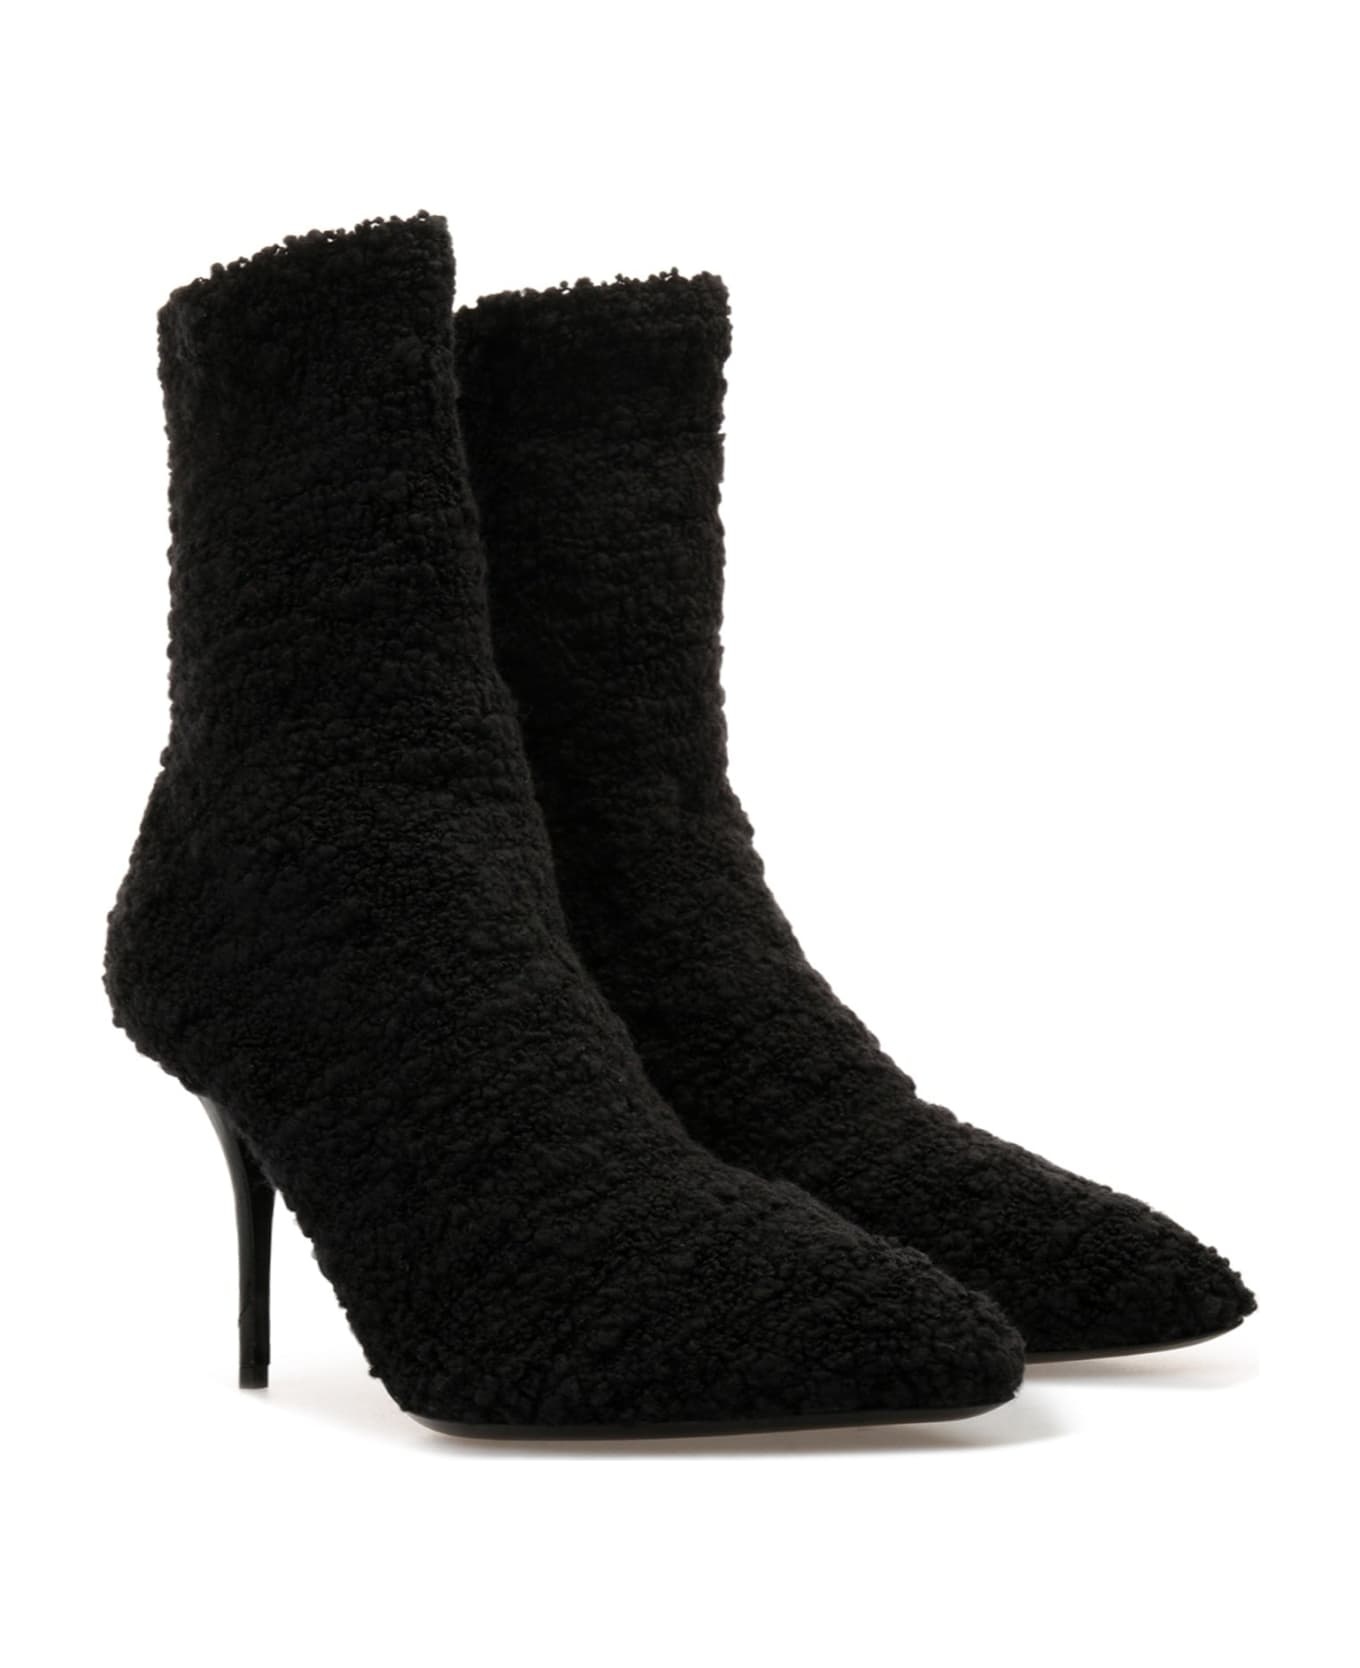 Shearling Boots - 2